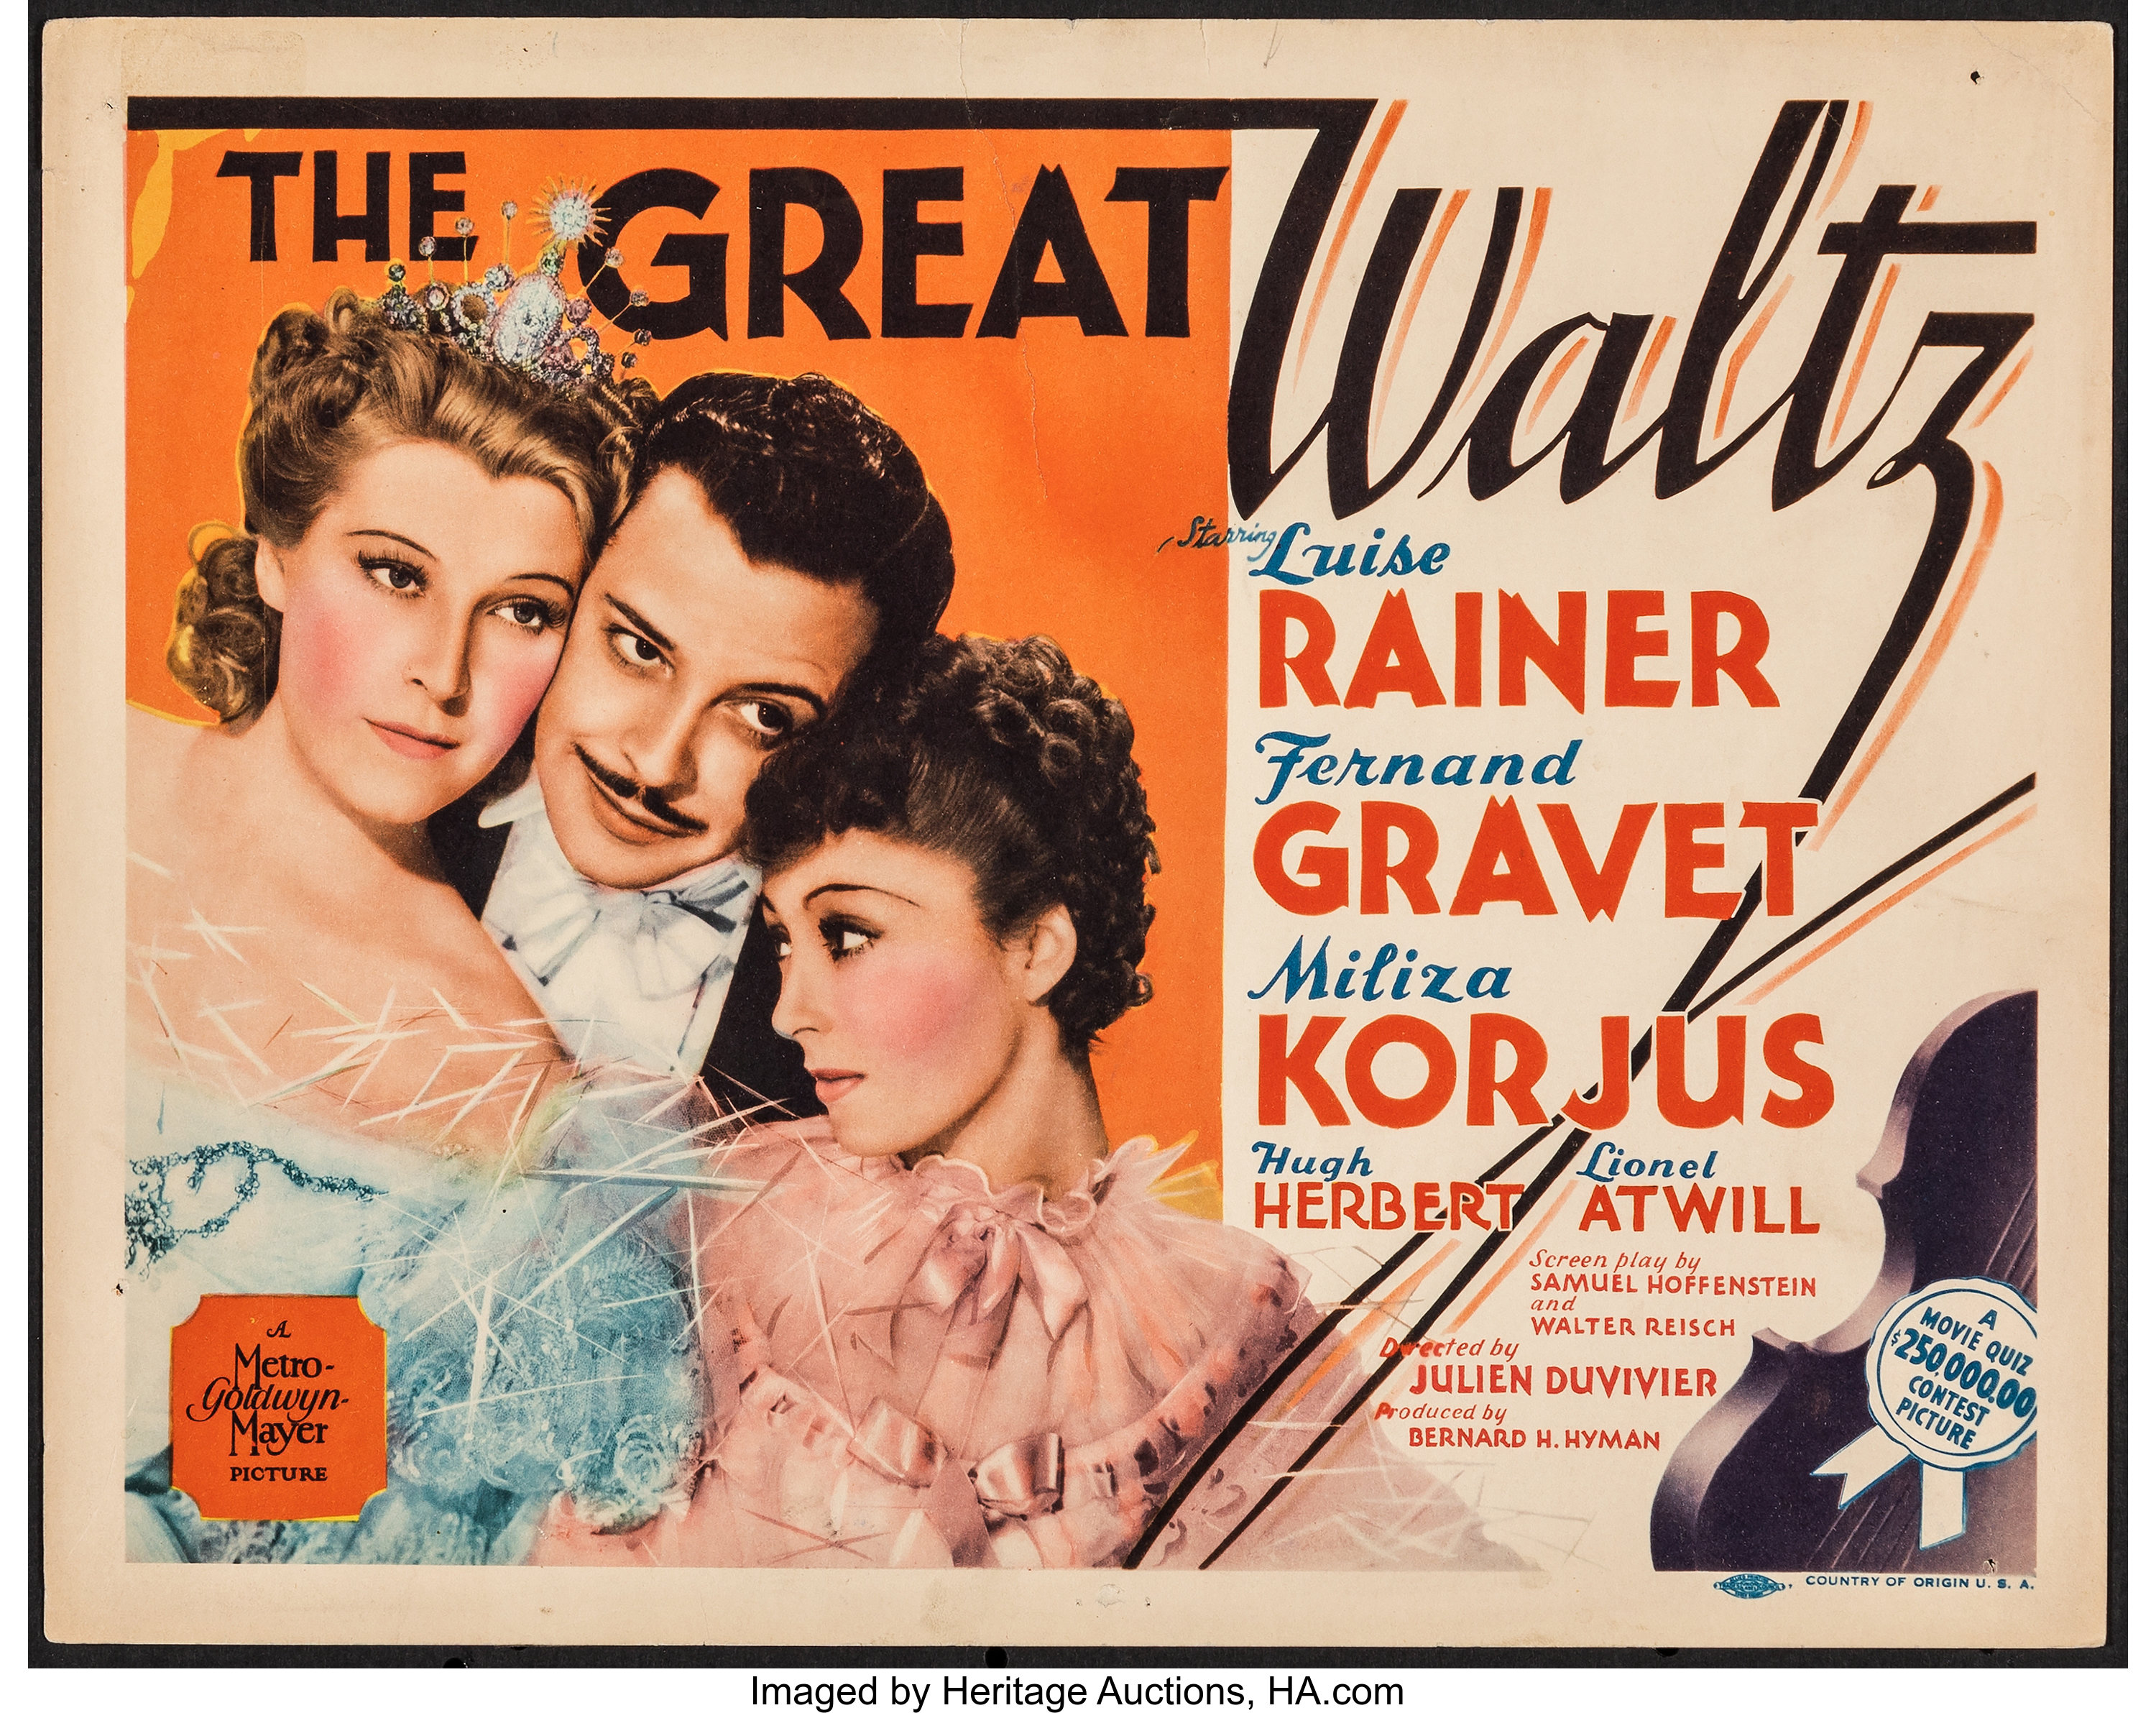 The Great Waltz Mgm 1938 Fine Title Lobby Card 11 X 14 Lot 52179 Heritage Auctions 0204